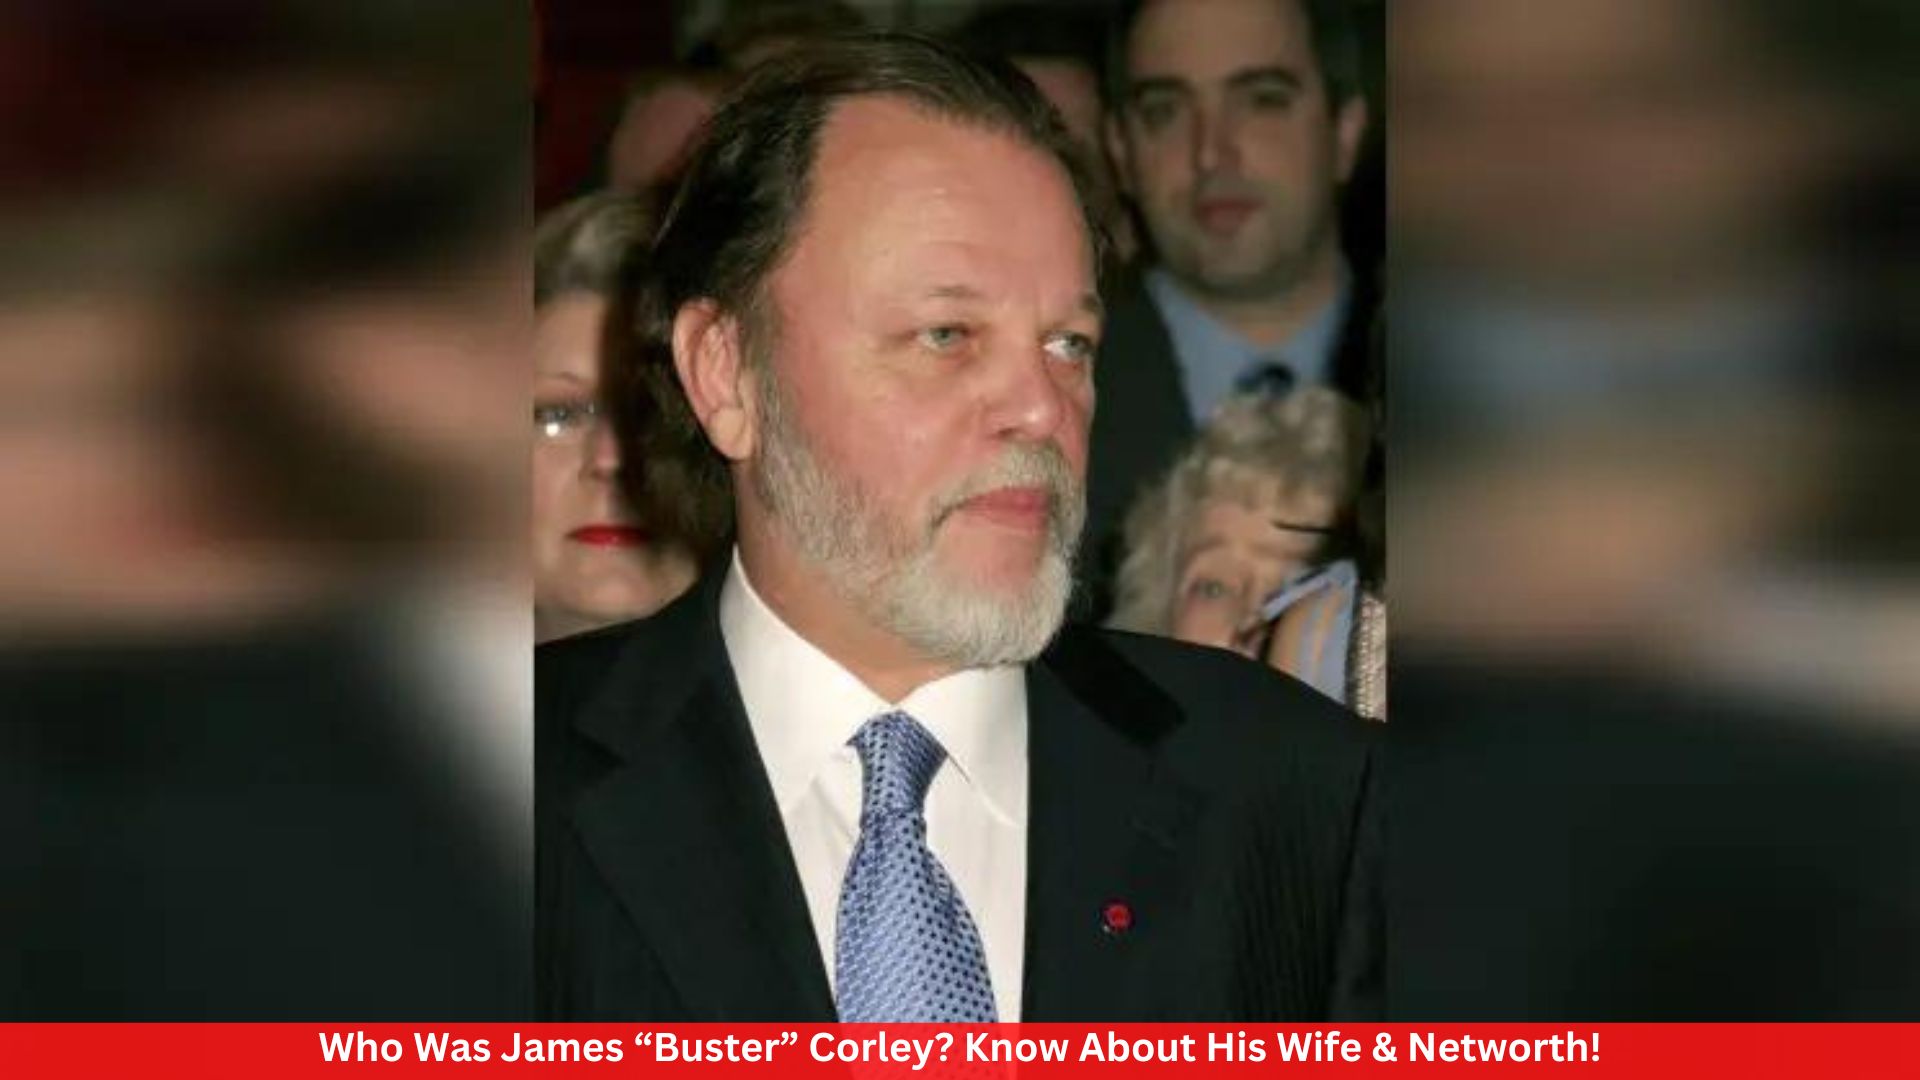 Who Was James “Buster” Corley? Know About His Wife & Networth!